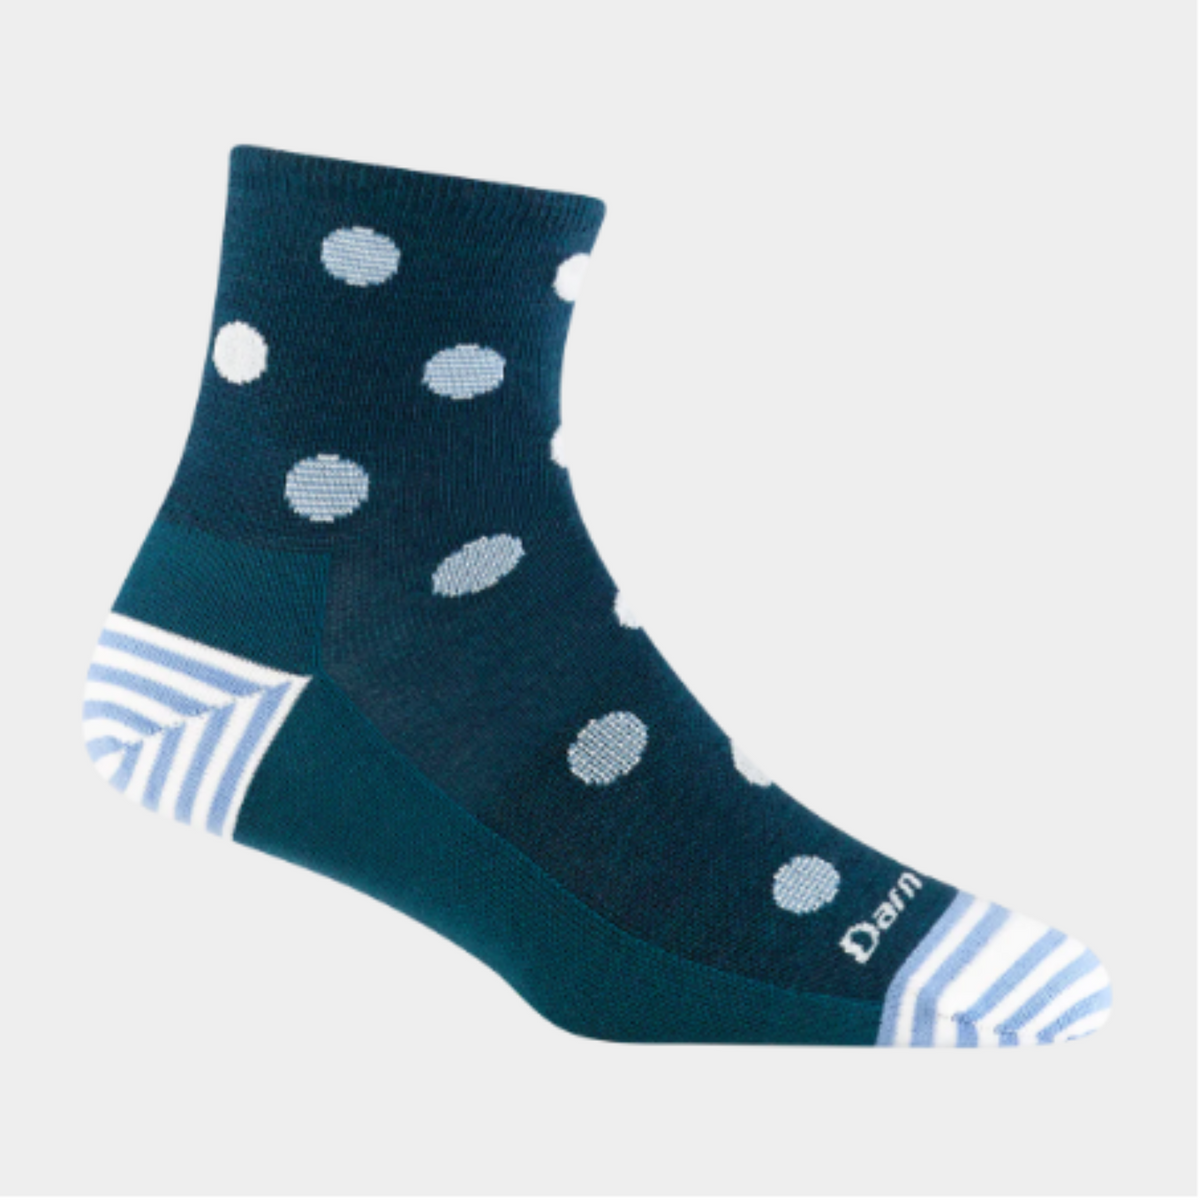 Darn Tough 6103 Dottie Shorty Lightweight Lifestyle women&#39;s quarter-height sock featuring teal blue sock with light blue polka dots all over. Sock shown on display foot. 